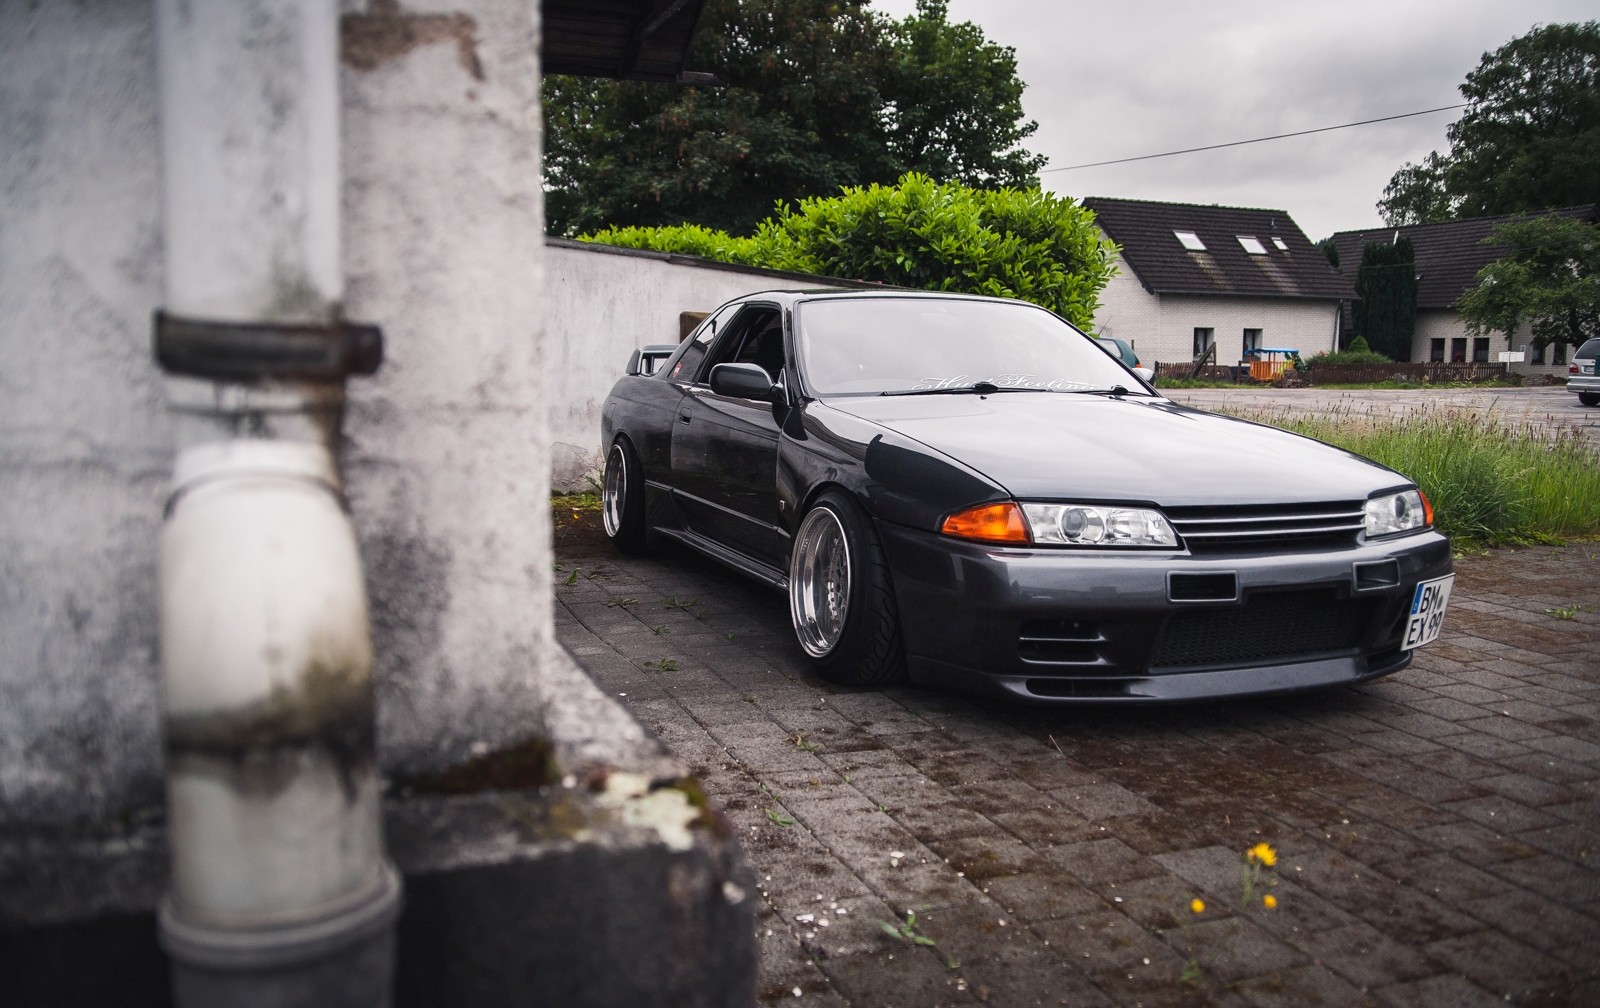 gtr r32 1080P 2k 4k Full HD Wallpapers Backgrounds Free Download   Wallpaper Crafter